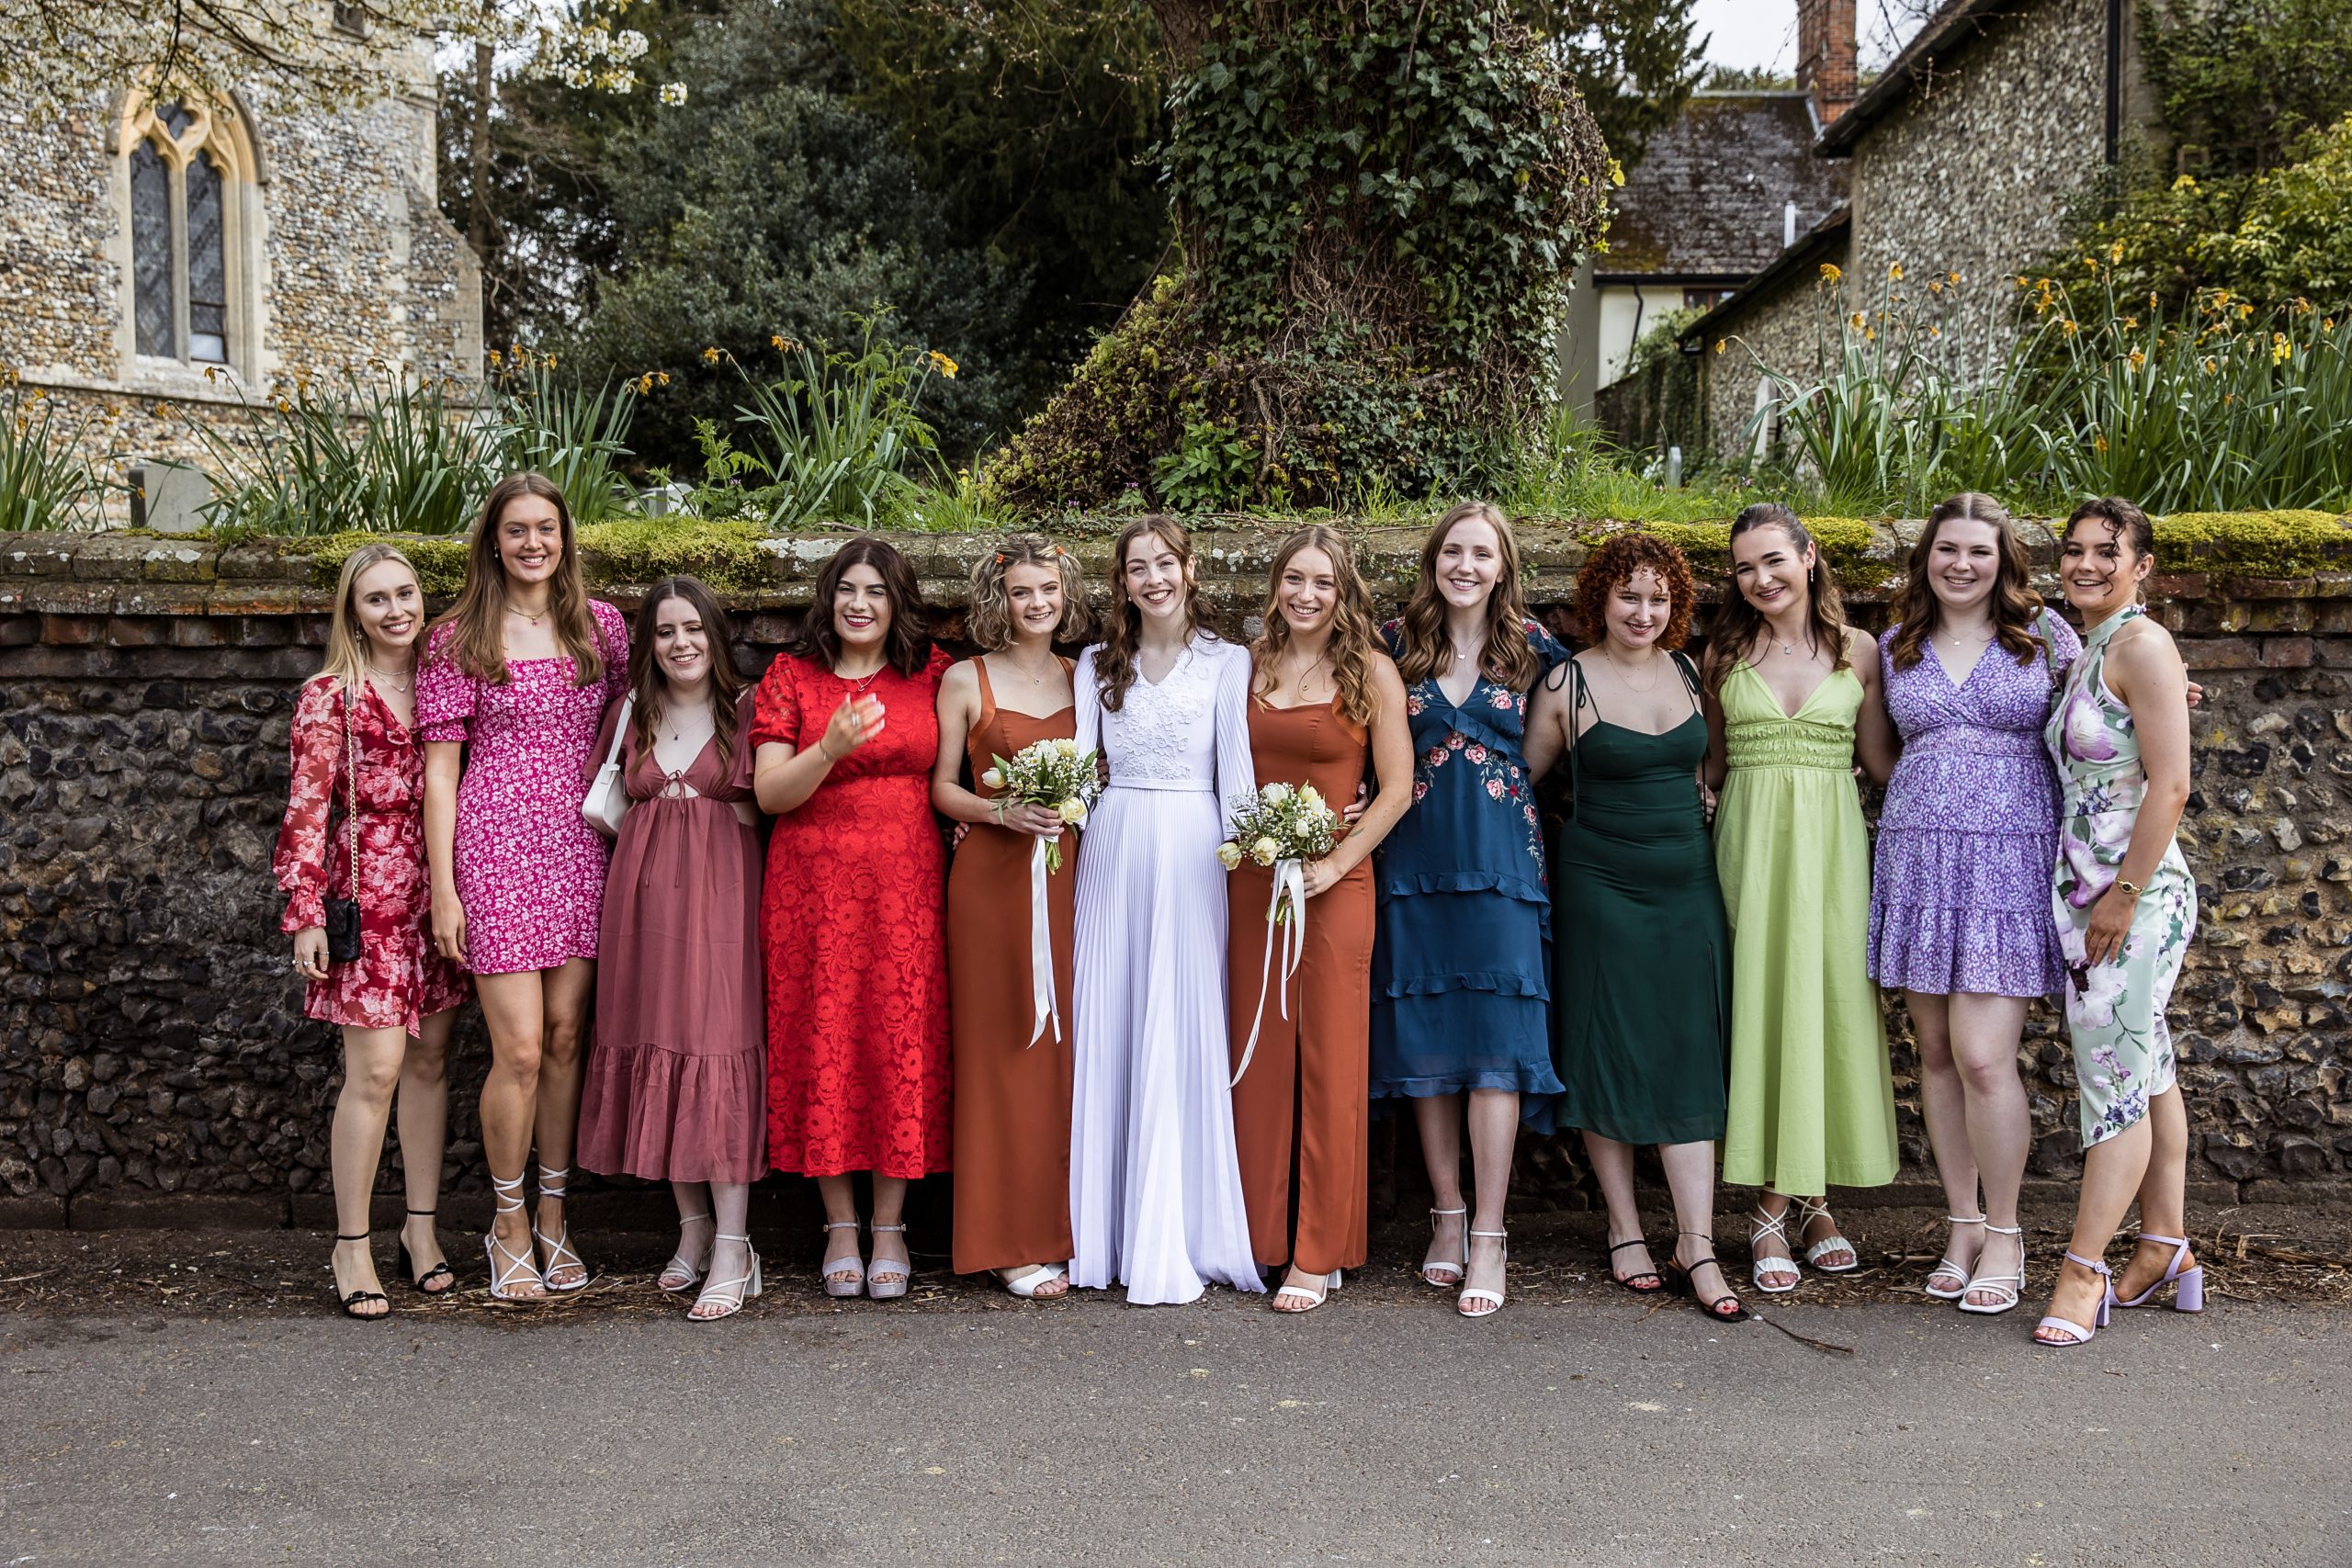 A bride and her bridesmaids all dressed in colourful clothing at a hertfordshire wedding. Photography y Natalie Martinez